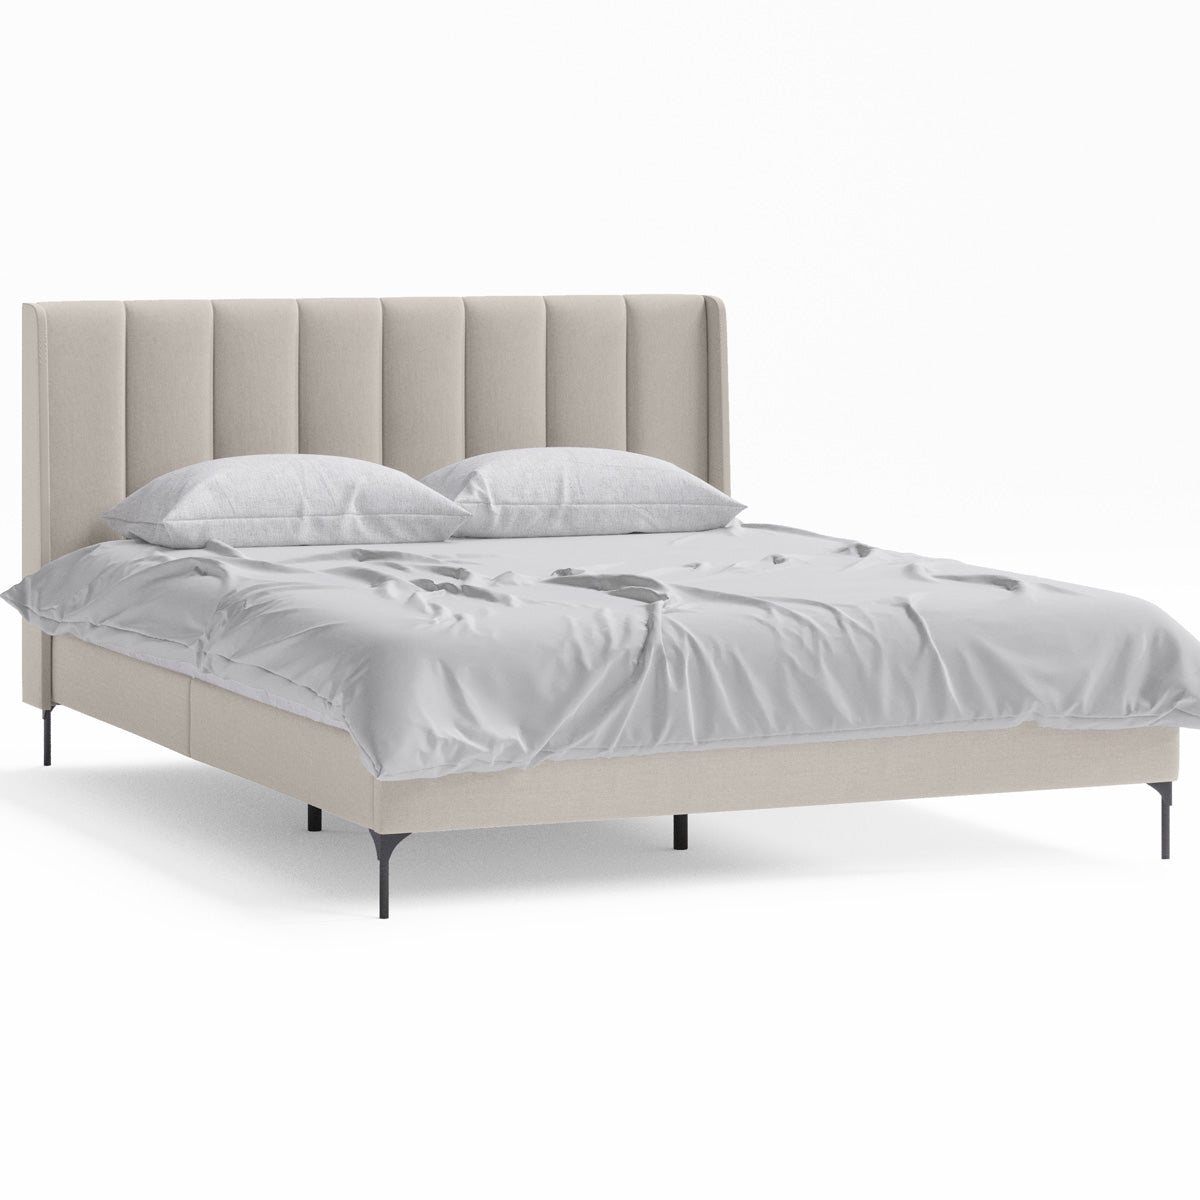 Brooklyn Fabric Wing Bed Frame (Natural Beige)